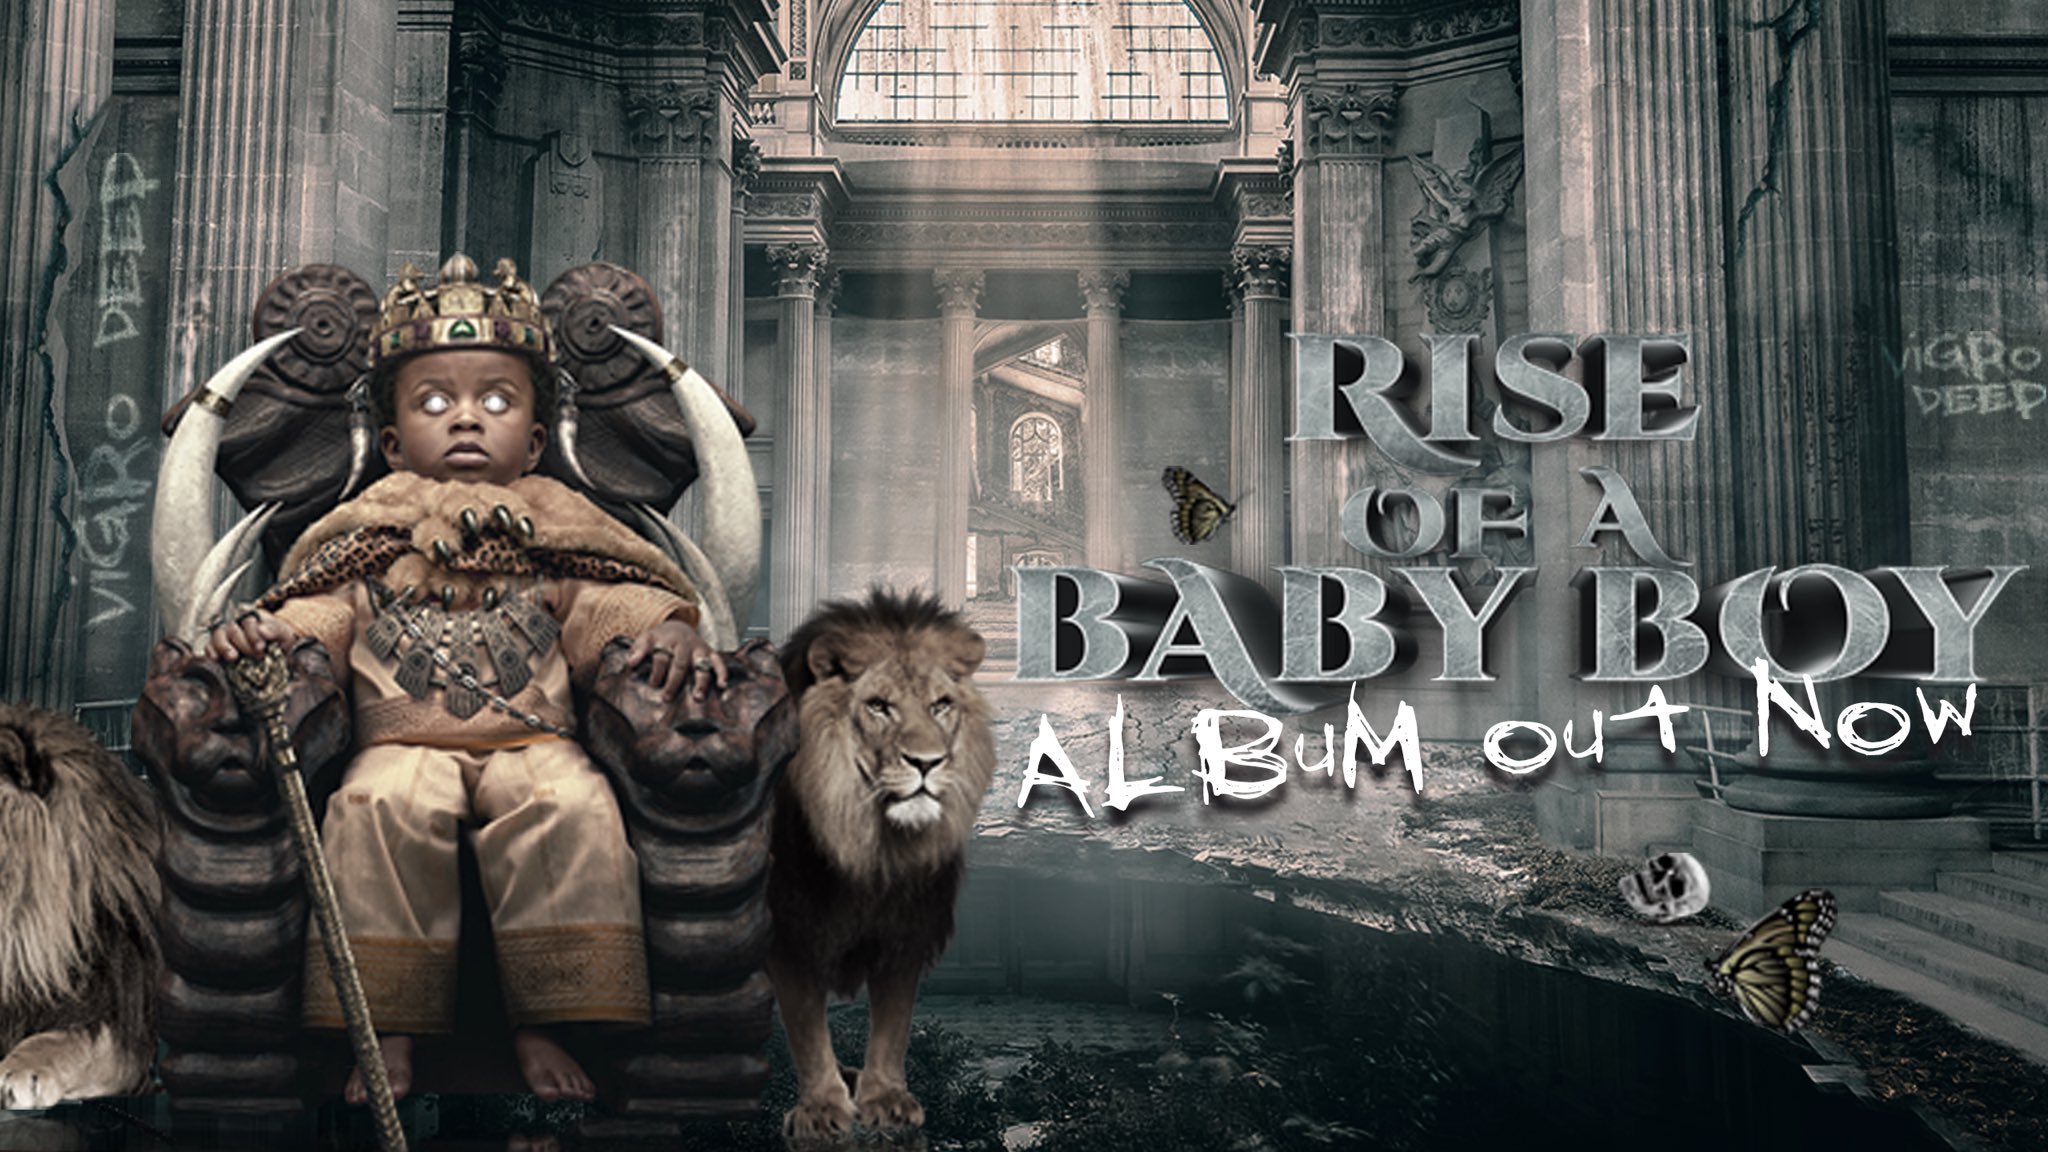 Vigro Deep Rise of baby boy scorching new album out